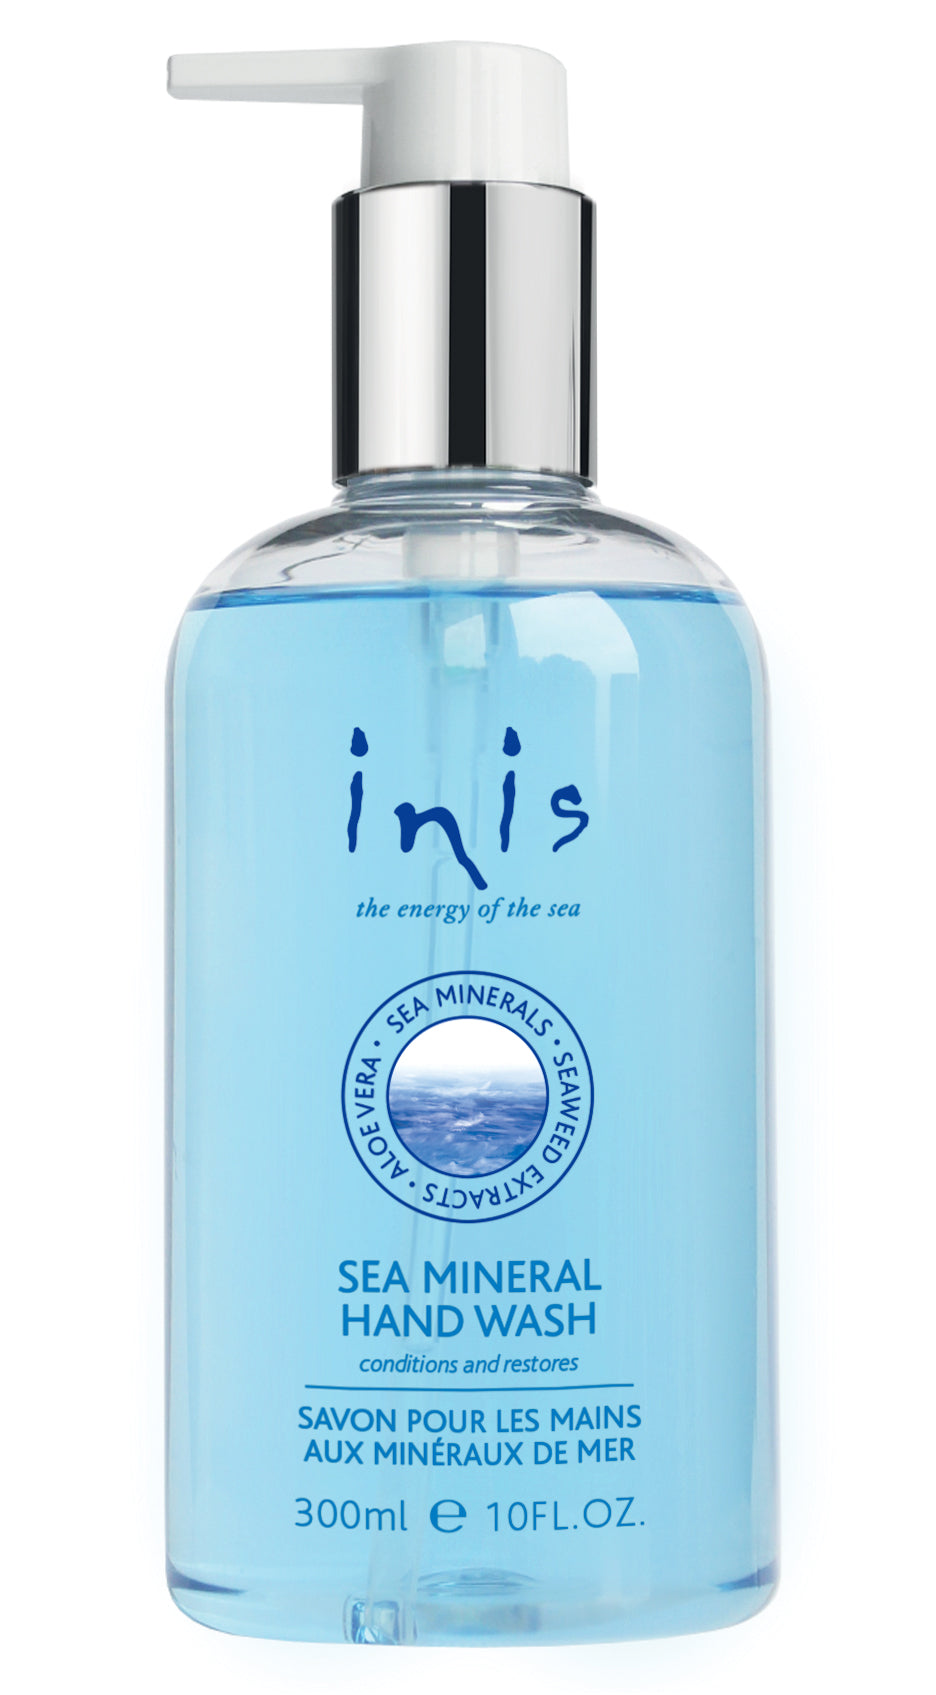 Inis, the Energy of the Sea, Hand Wash, 10 fl. oz